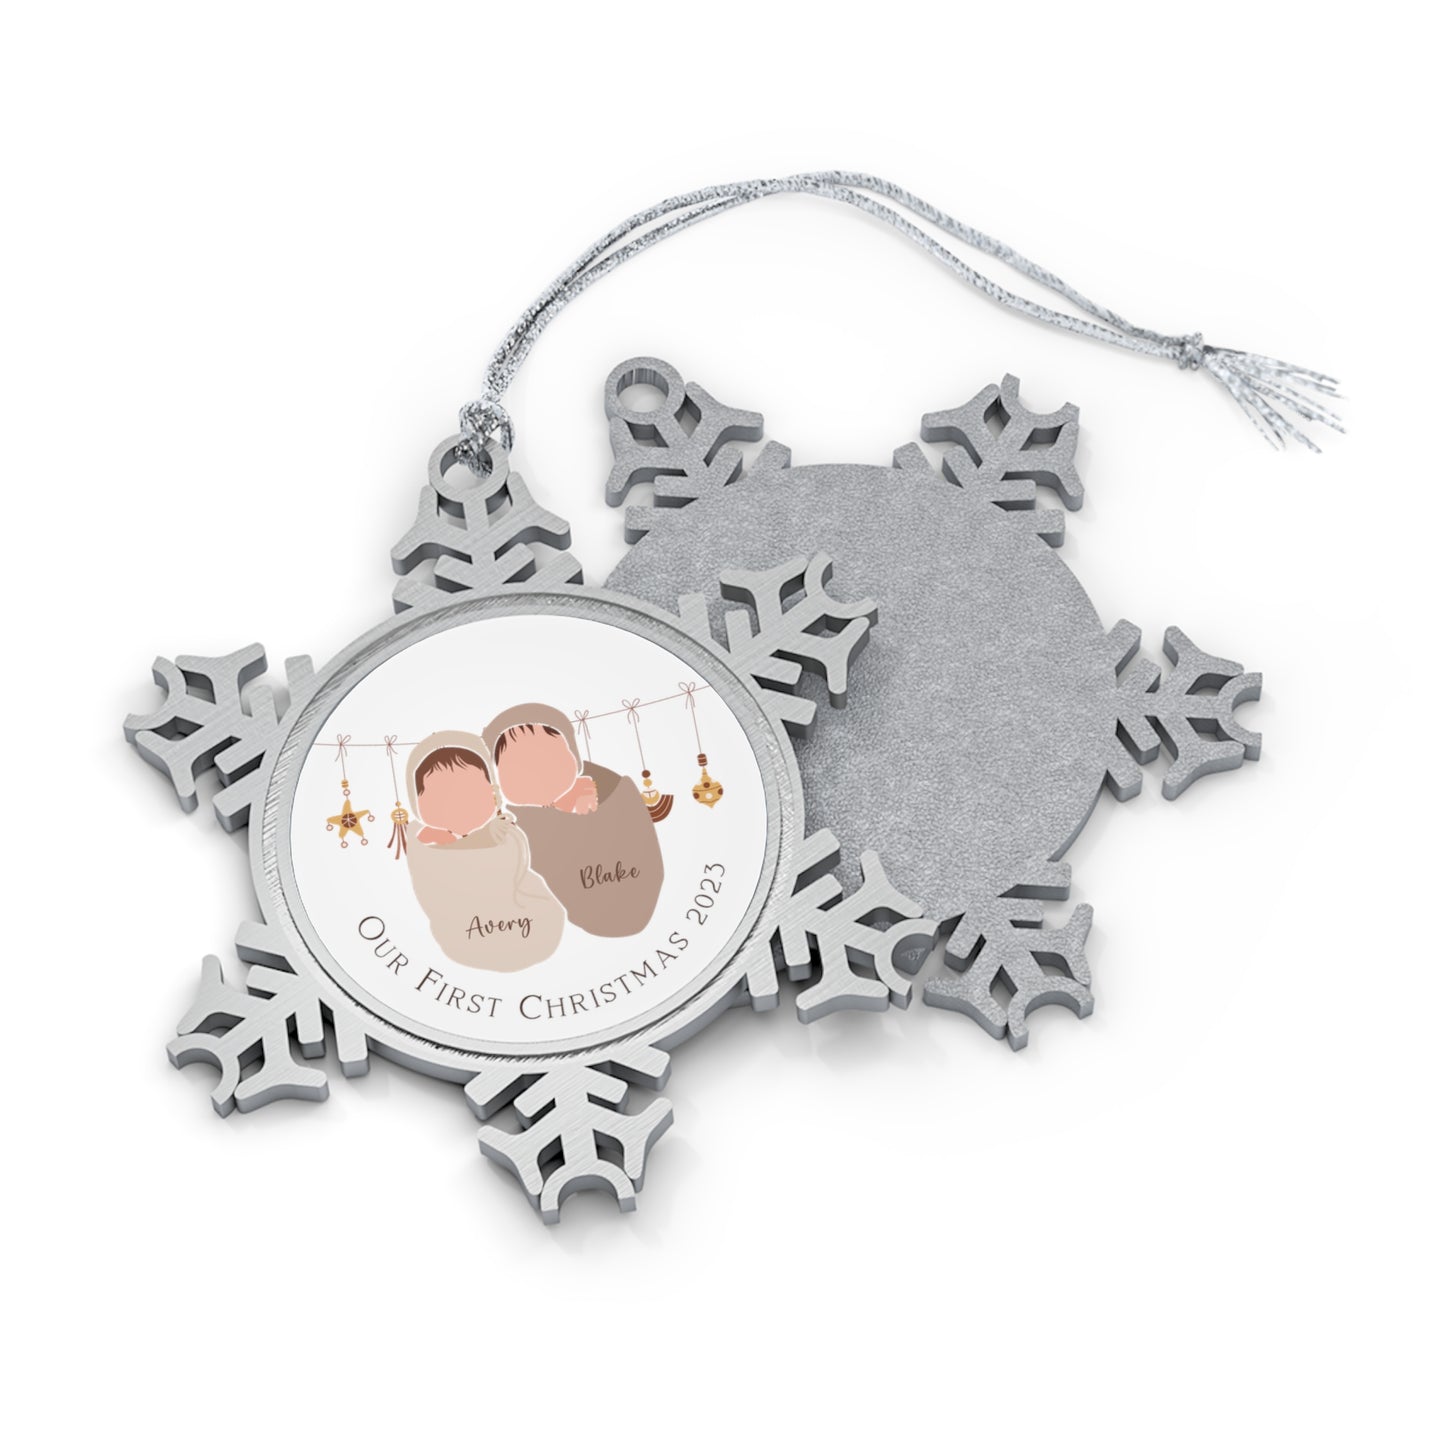 Personalised Pewter Snowflake Ornament | Baby Twins First Christmas